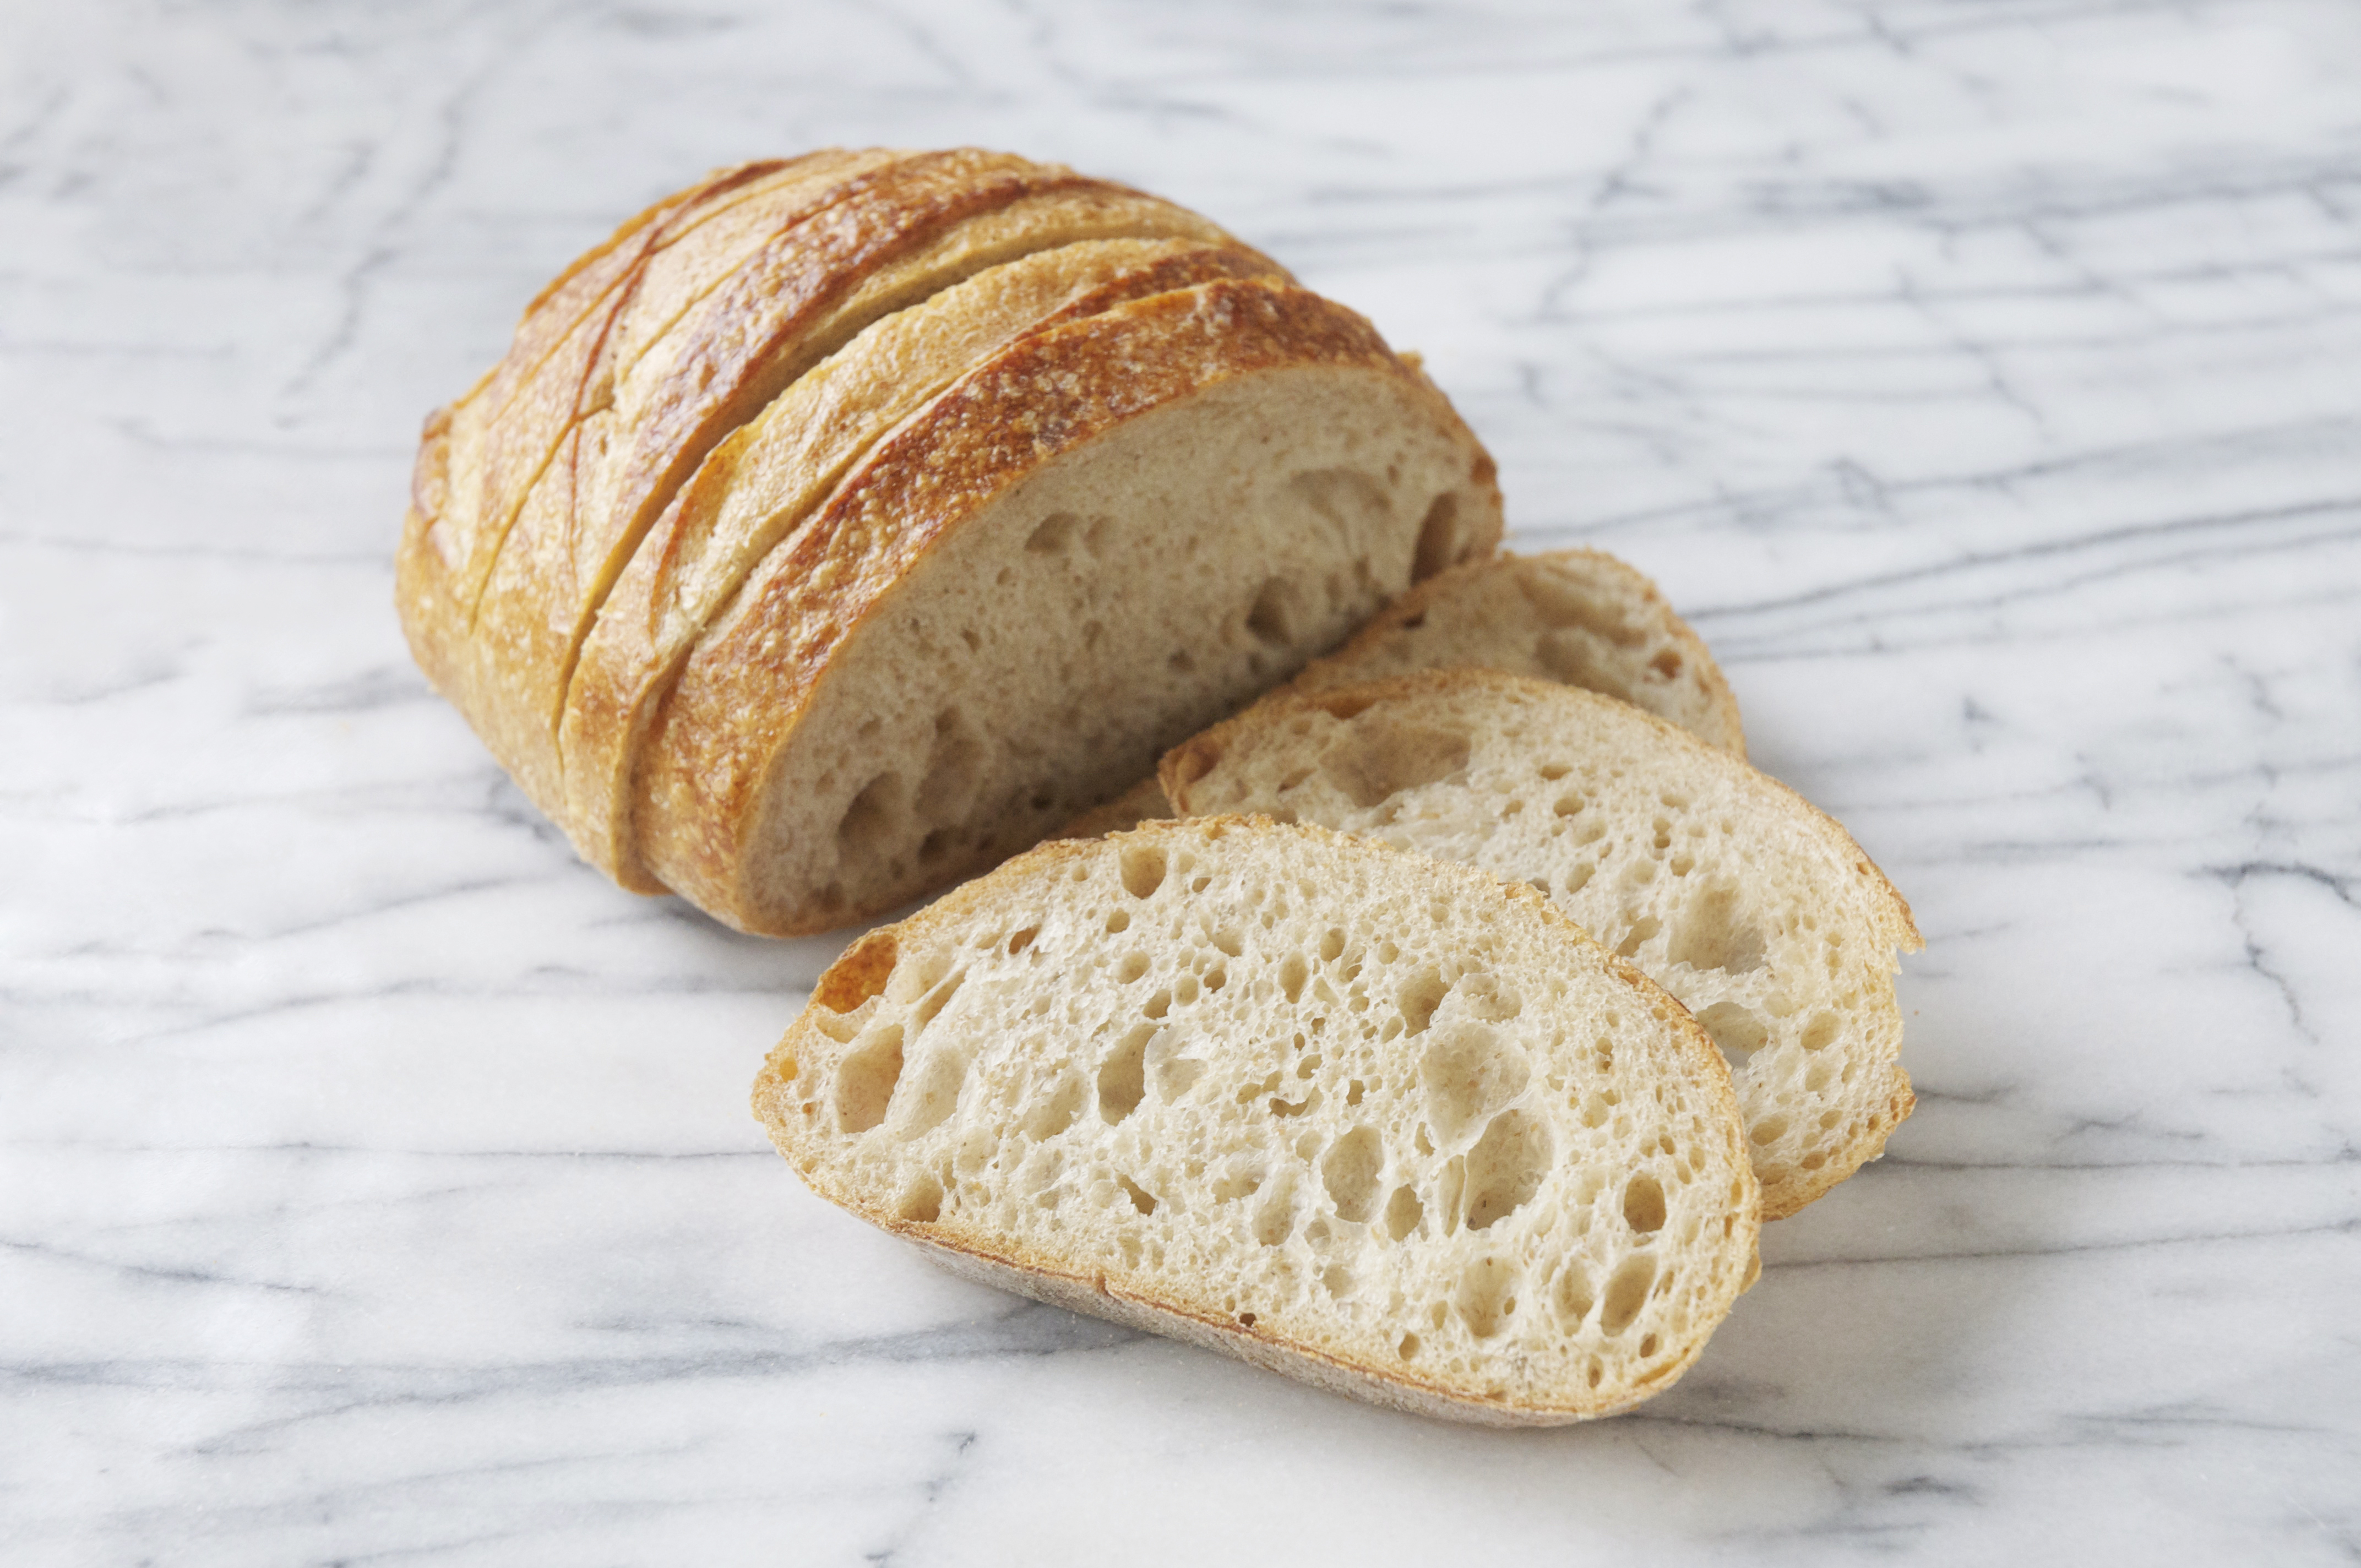 Can you use dough conditioner in your sourdough bread?